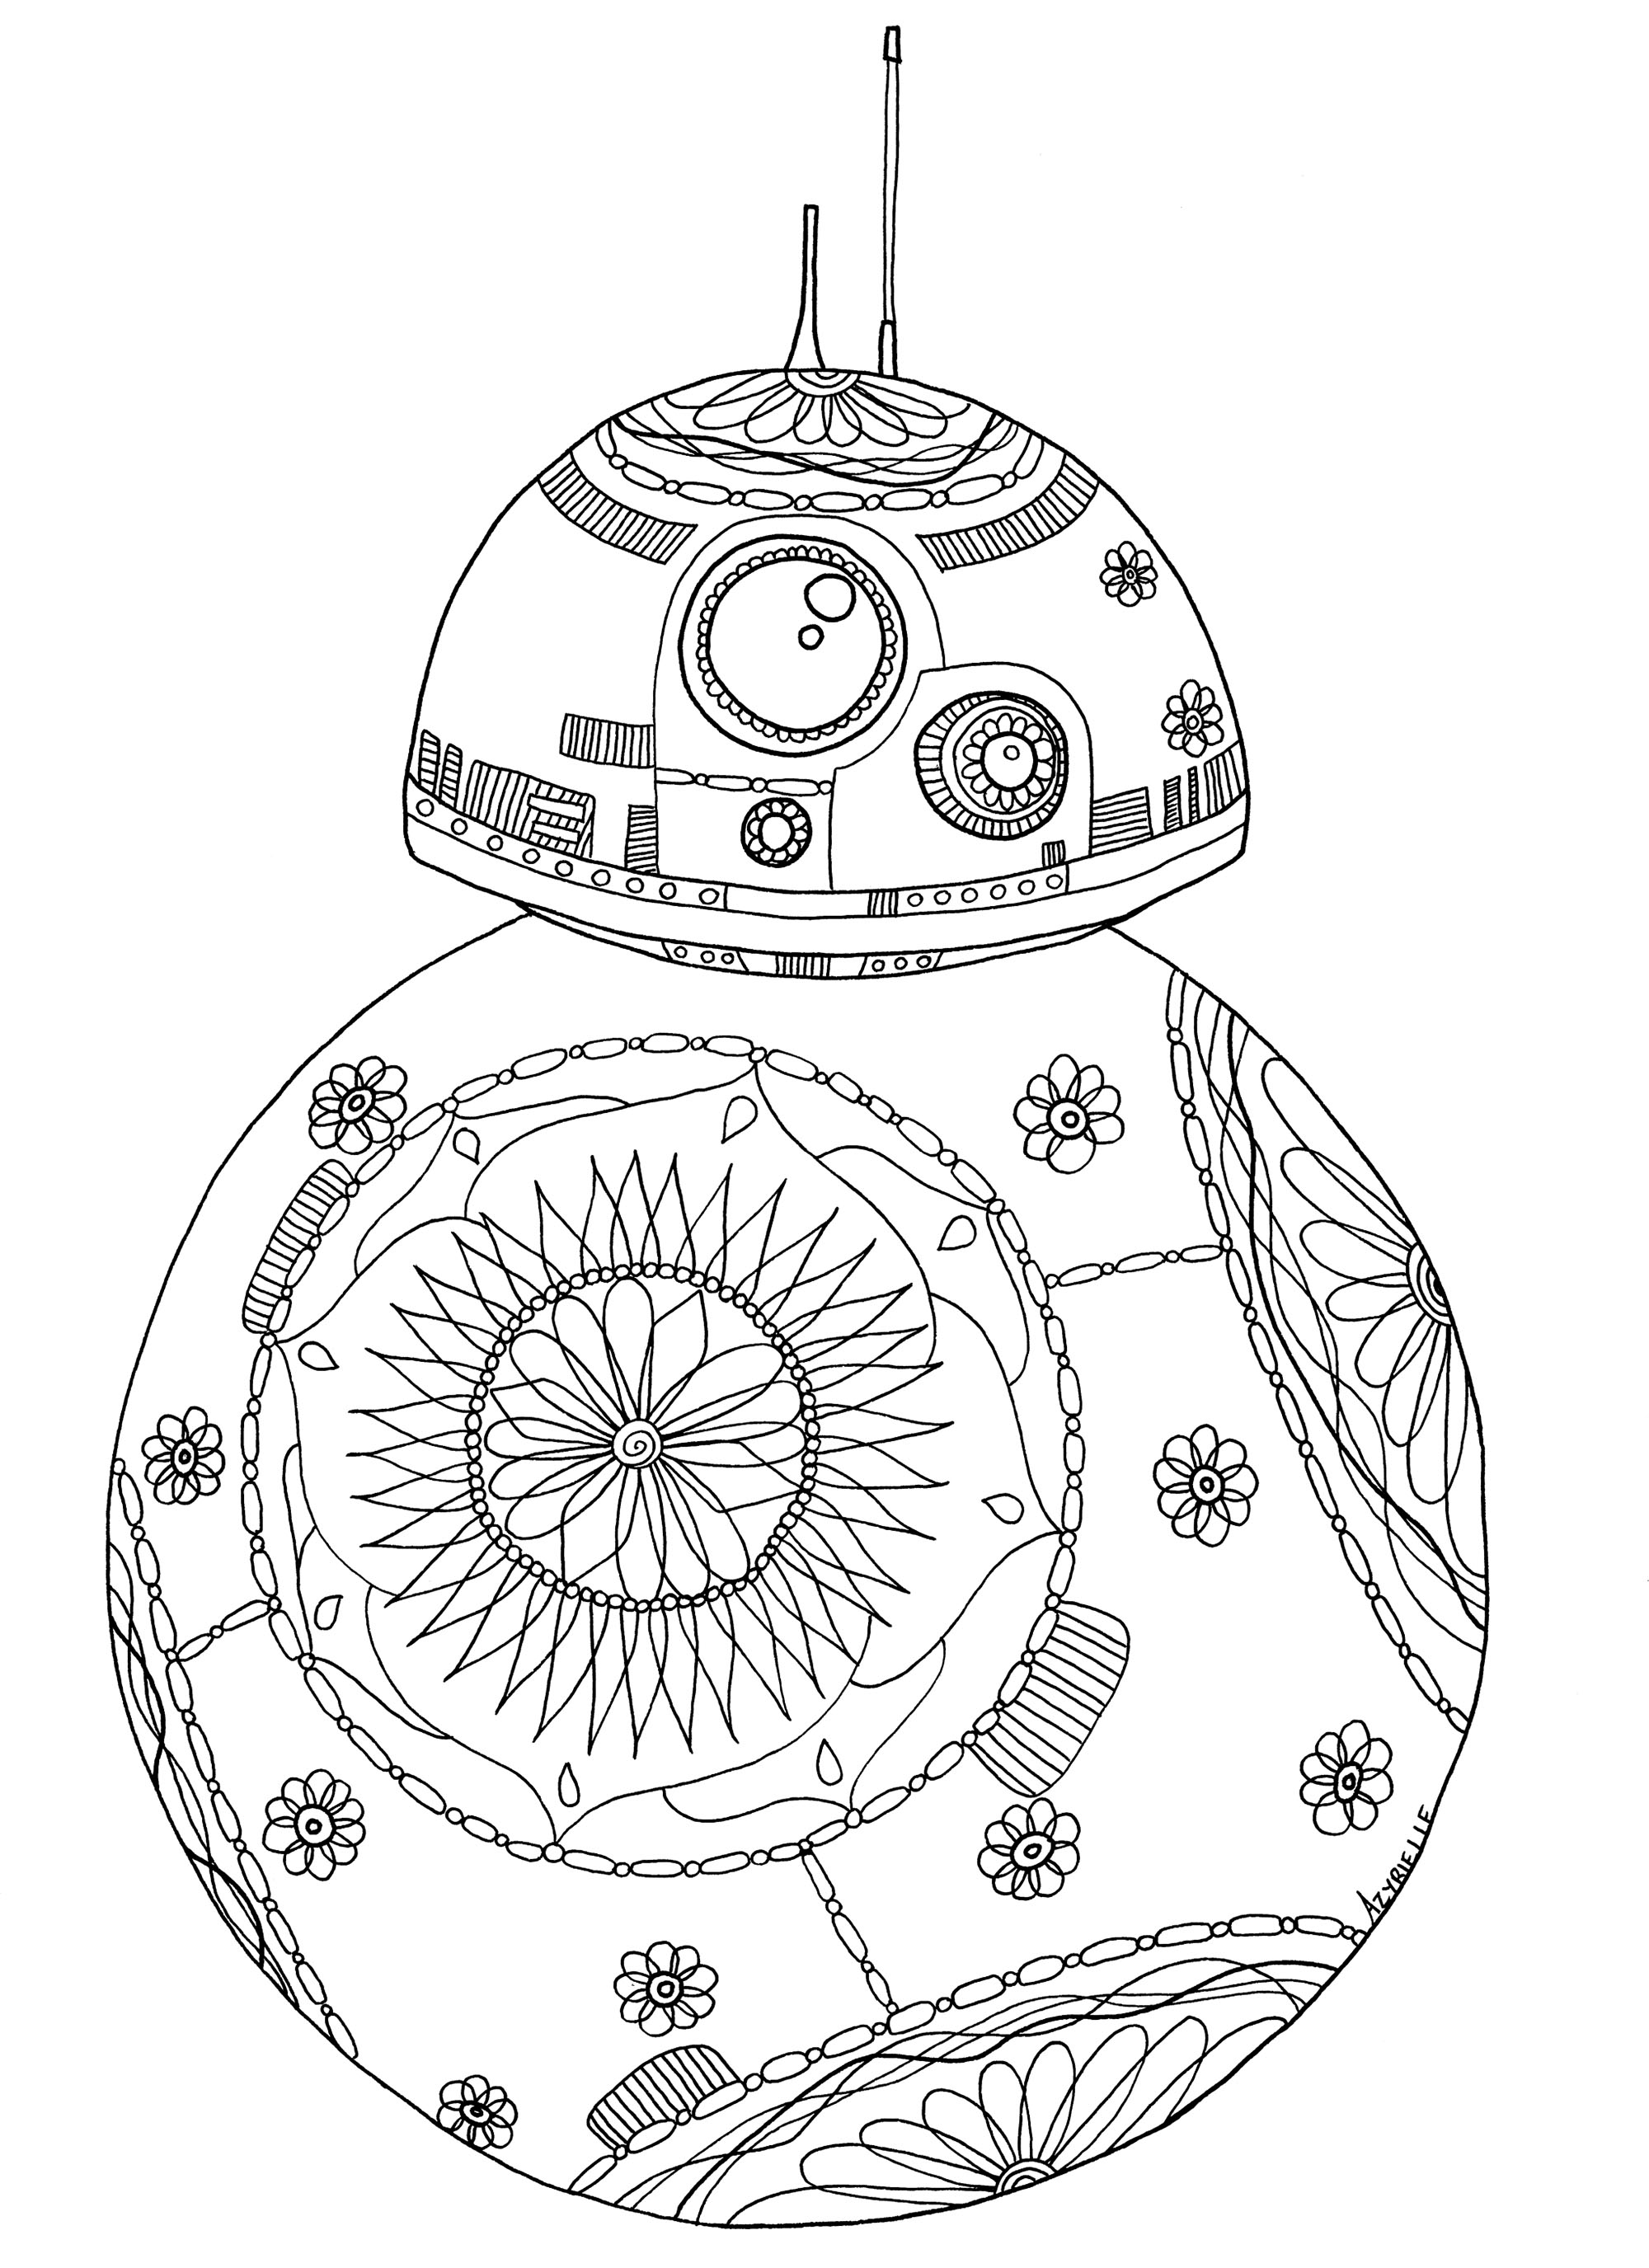 colouring pages for adults star wars star wars free printable coloring pages for adults kids pages wars adults star colouring for 